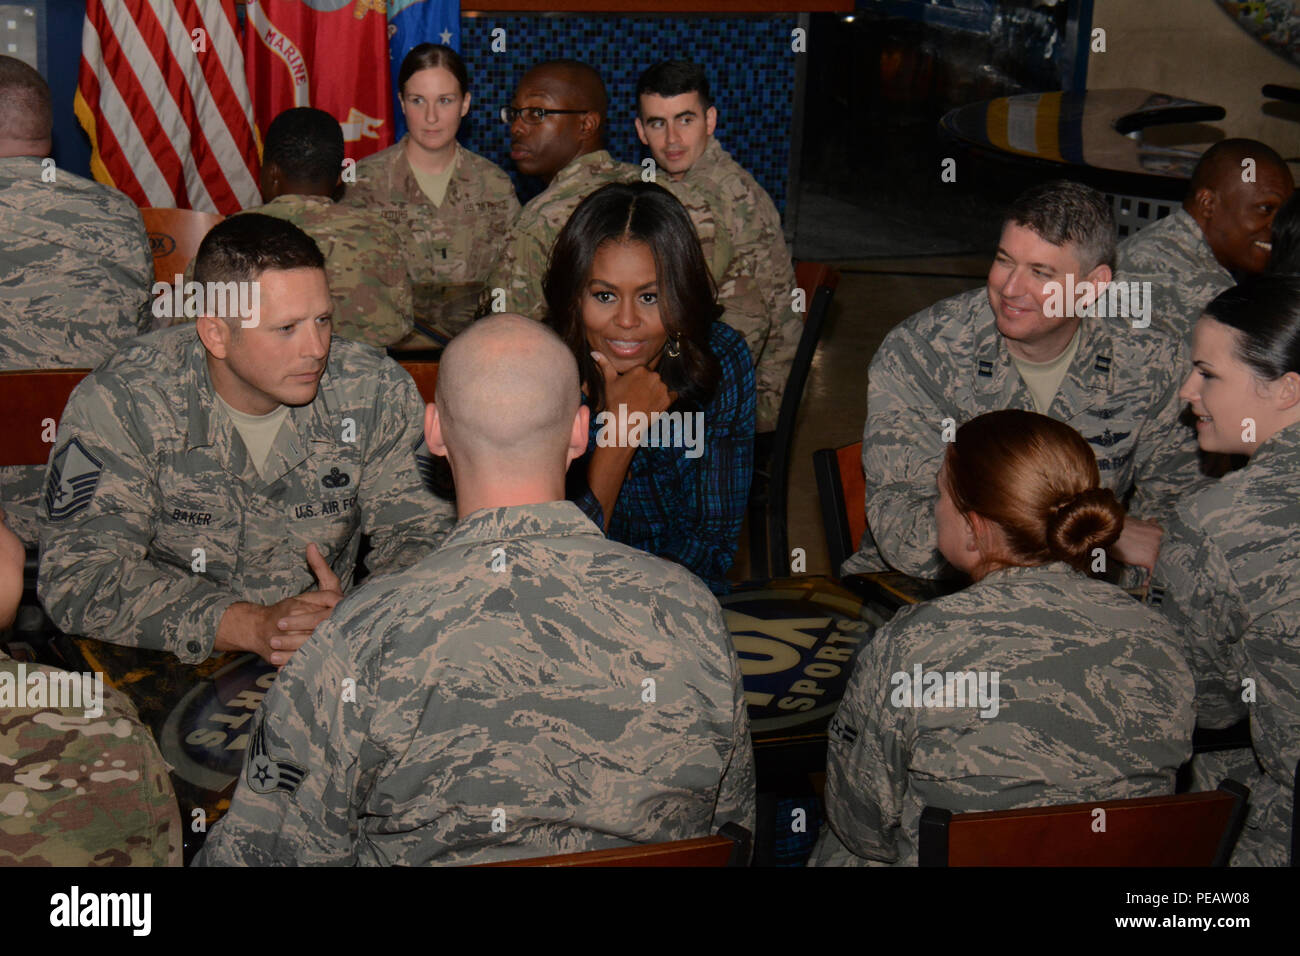 The First Lady of the United States Michelle Obama meets with service  members inside the Fox Sky Box at Al Udeid Air Base, Qatar, Nov. 3. Obama  said she is very proud